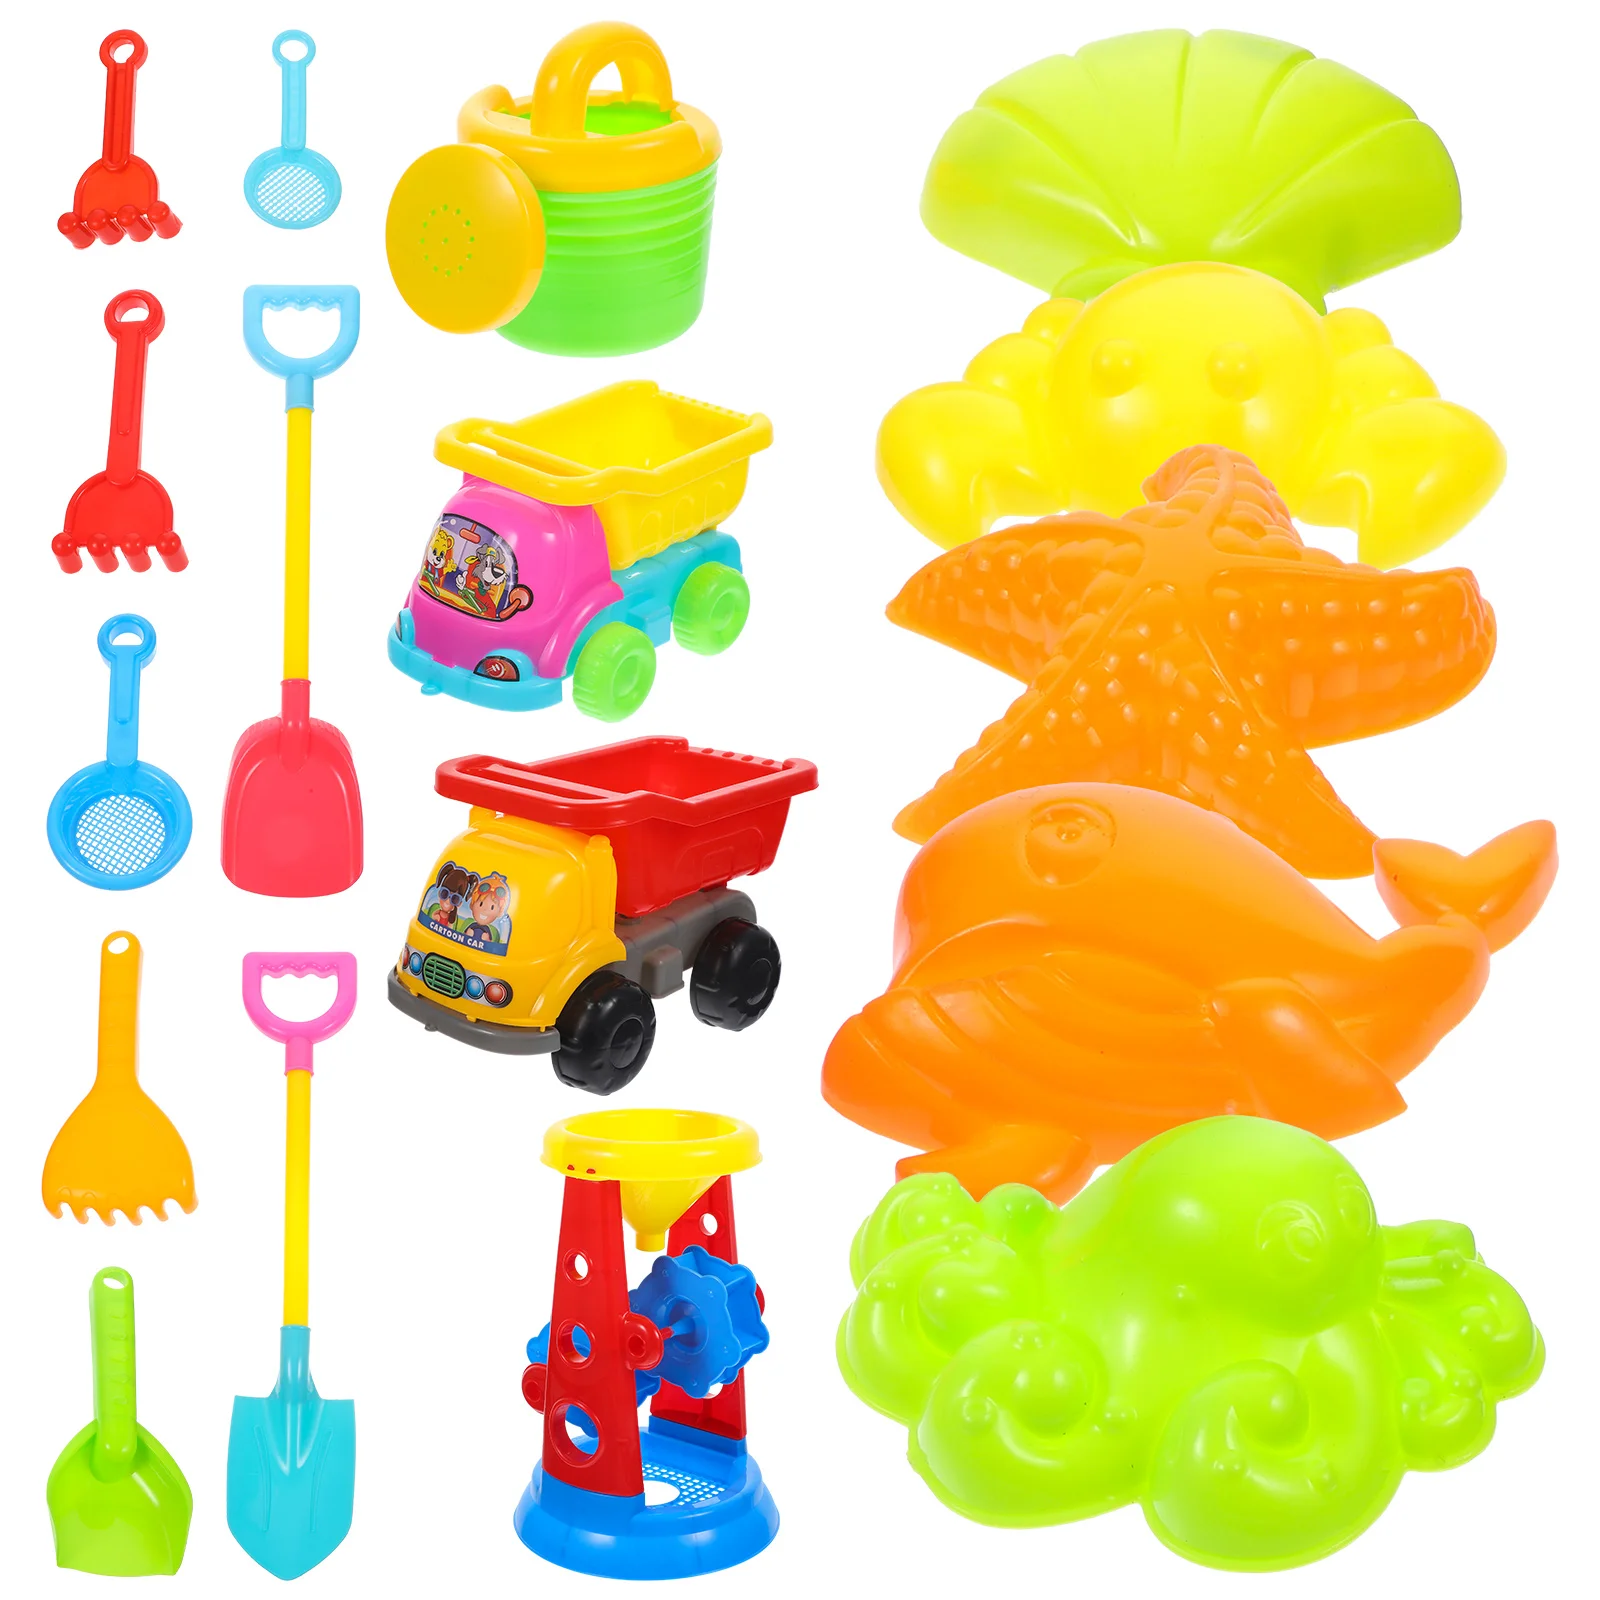 

17pcs Beach Sand Toys Set Sand Castle Set with Sand Molds Car Watering Can Sandbox Outdoor Beach Toys Set for Kids Toddlers